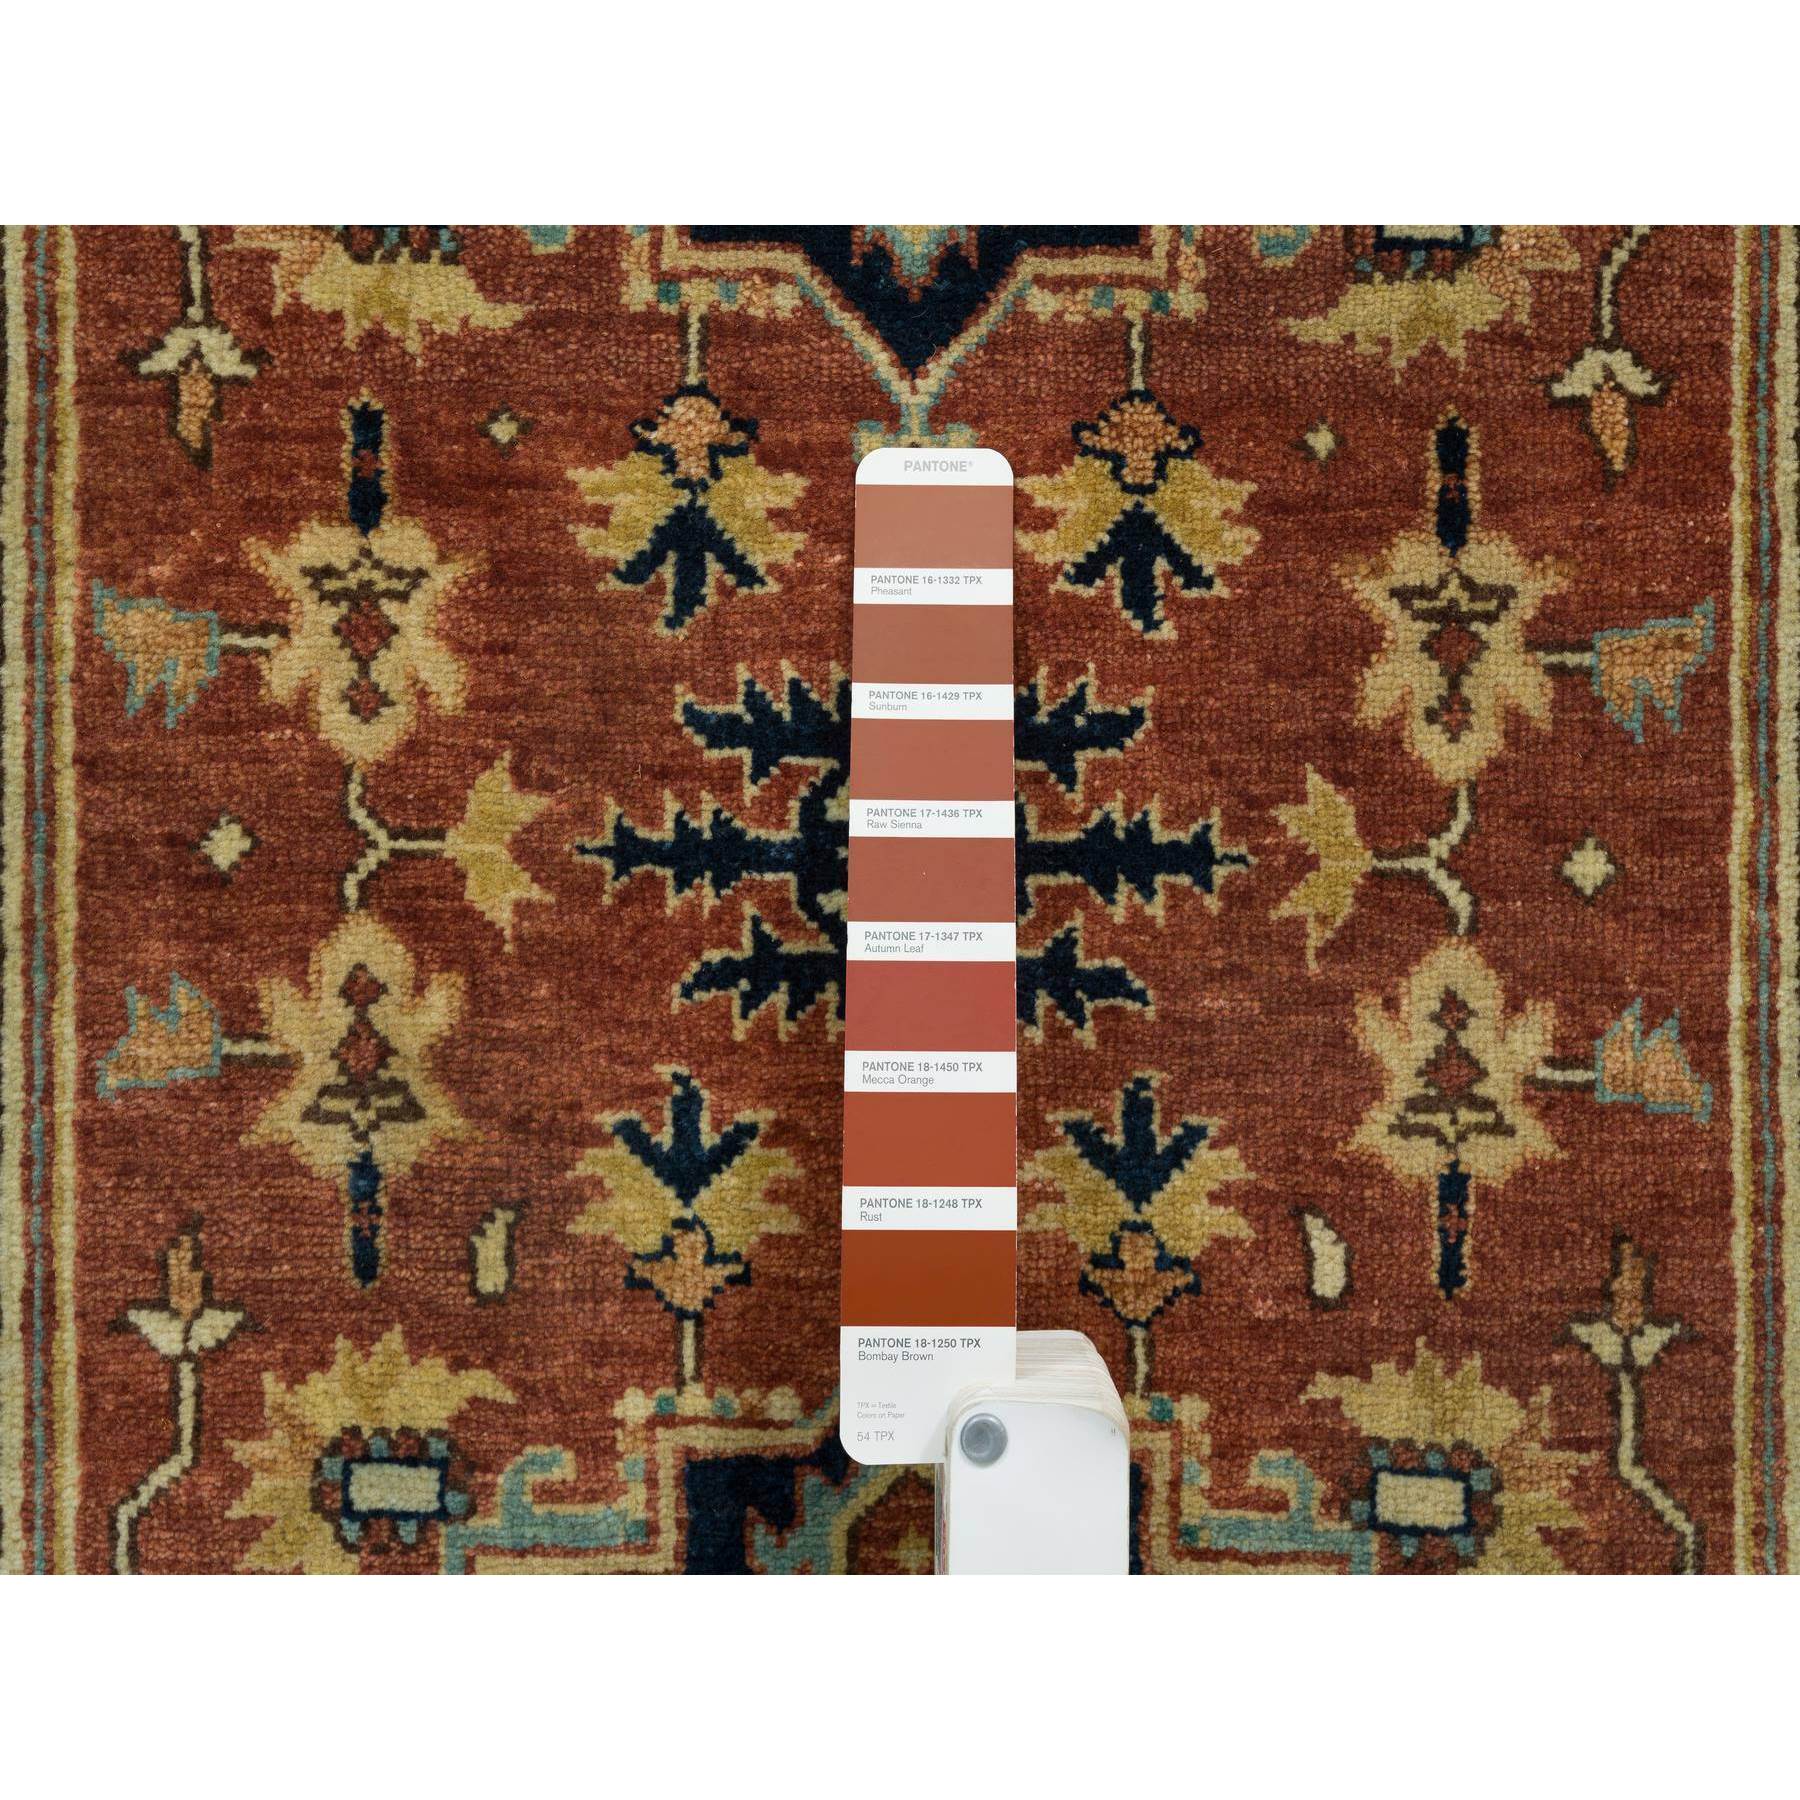 2'6"x8'1" Terracotta Red, Natural Dyes, Densely Woven, Organic Wool, Hand Woven, Antiqued Fine Heriz Re-Creation, Runner Oriental Rug 